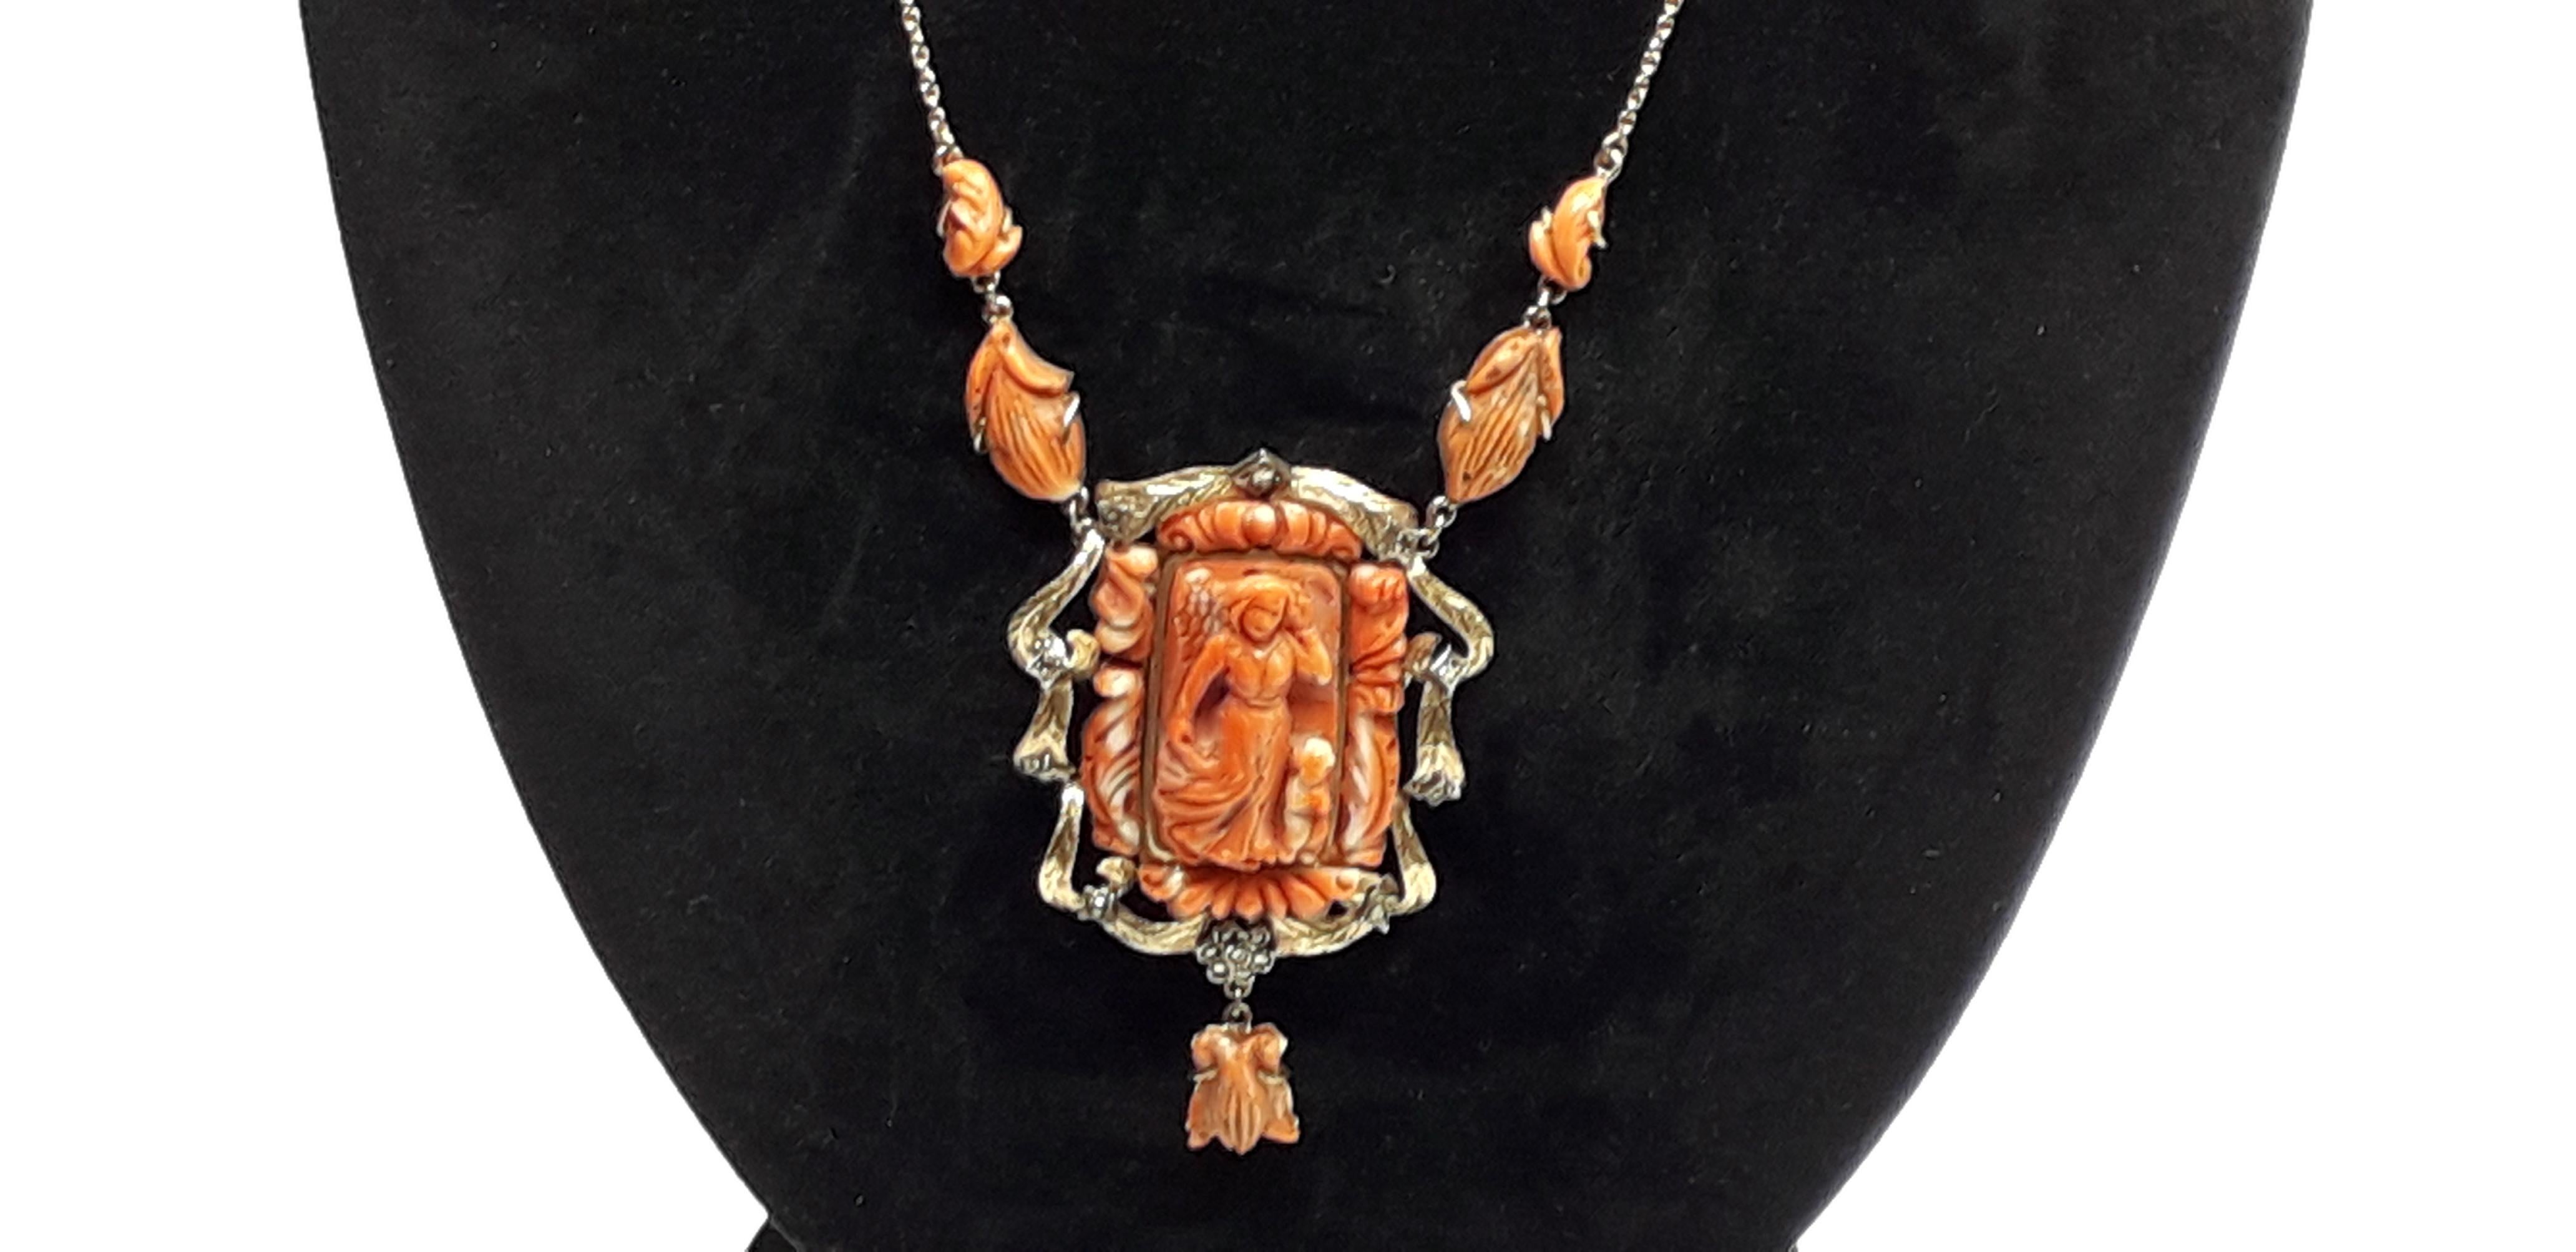 Beautiful necklace with 14K gold chain. At the center a large hand-carved coral pendant surrounded by small diamonds. High Italian gold craftsmanship perfect condition about 1980s.
